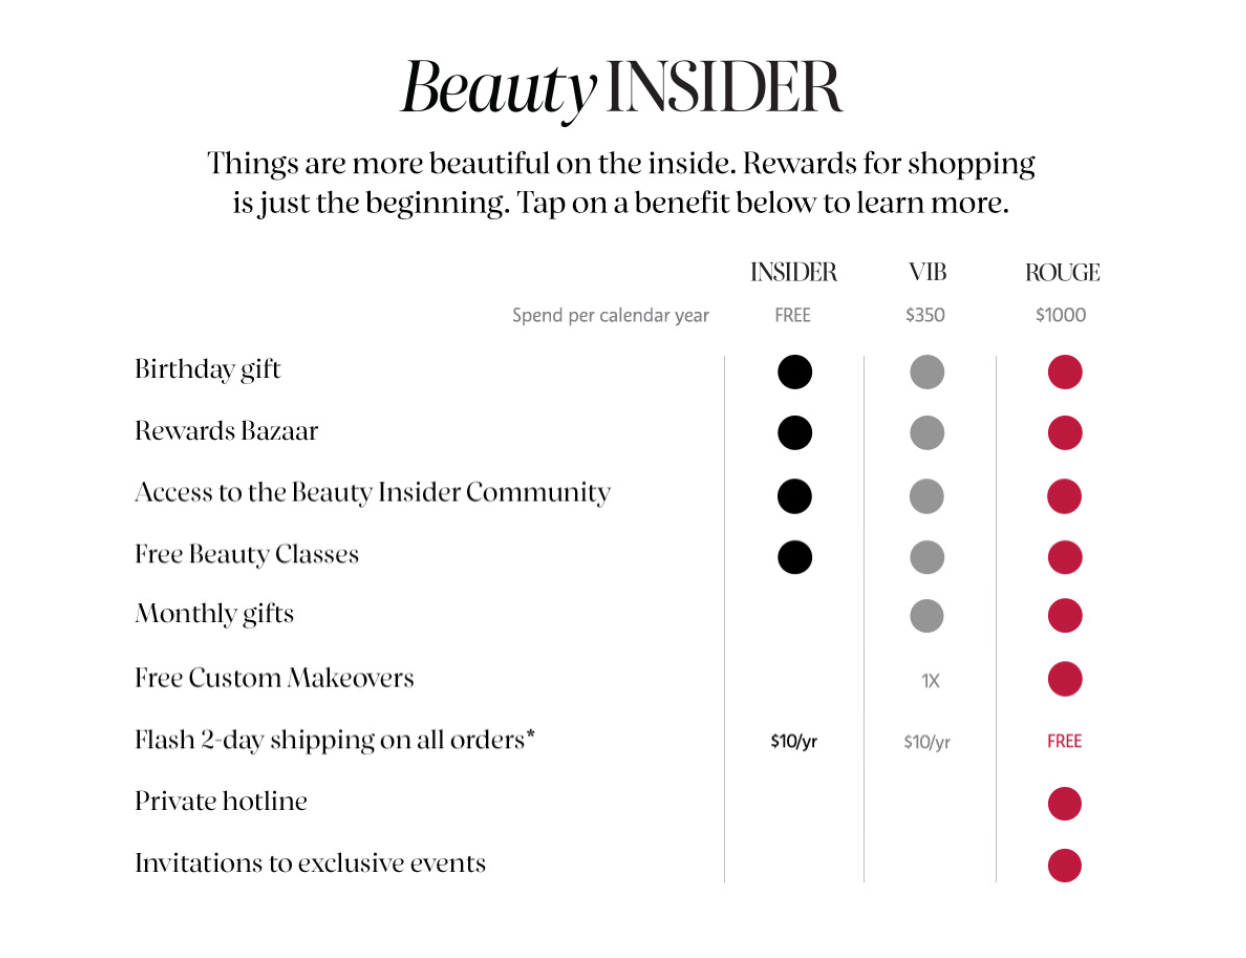 Sephora VIB loyalty program example, with loyalty tiers